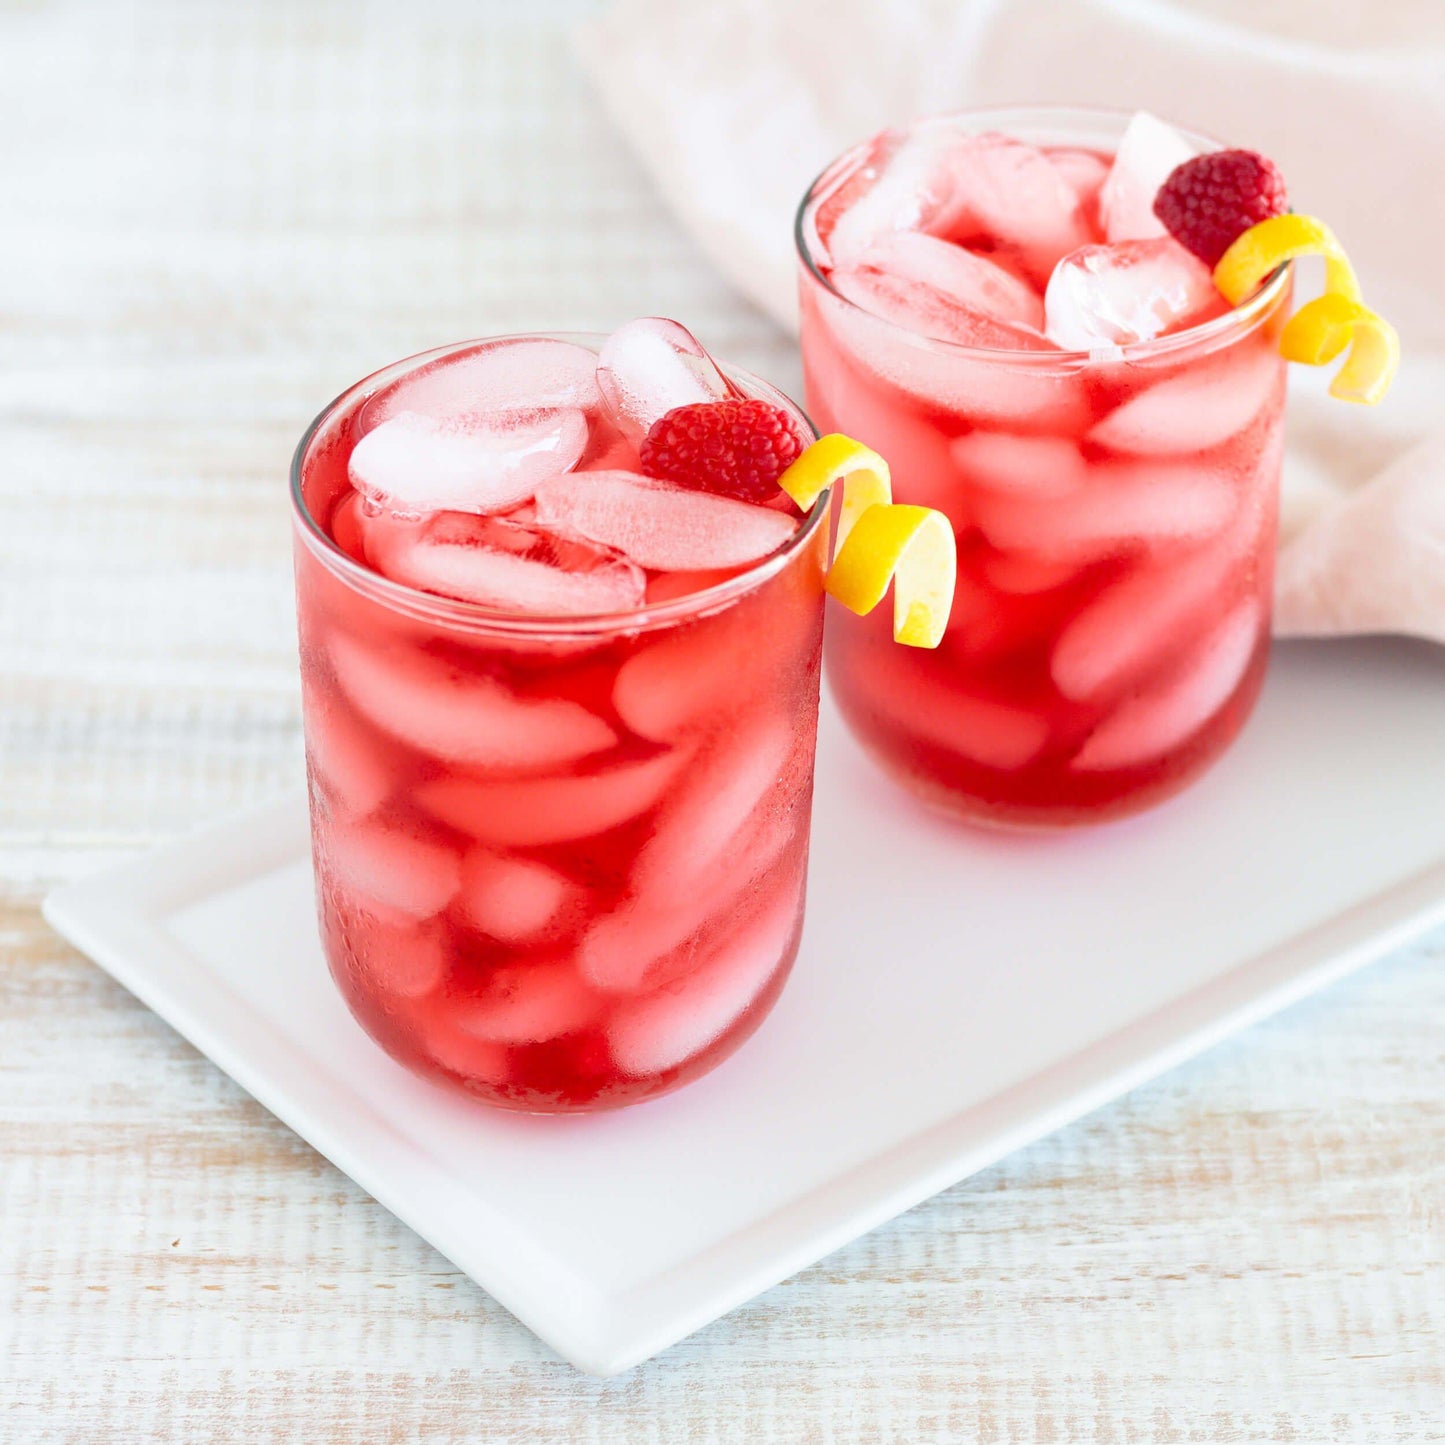 Raspberry Lemonade Organic Herbal Tea shown as iced tea in two short glasses each with a twist of lemon and a single raspberry garnish. The glasses are displayed on a rectangular white tray with a white cloth in the background